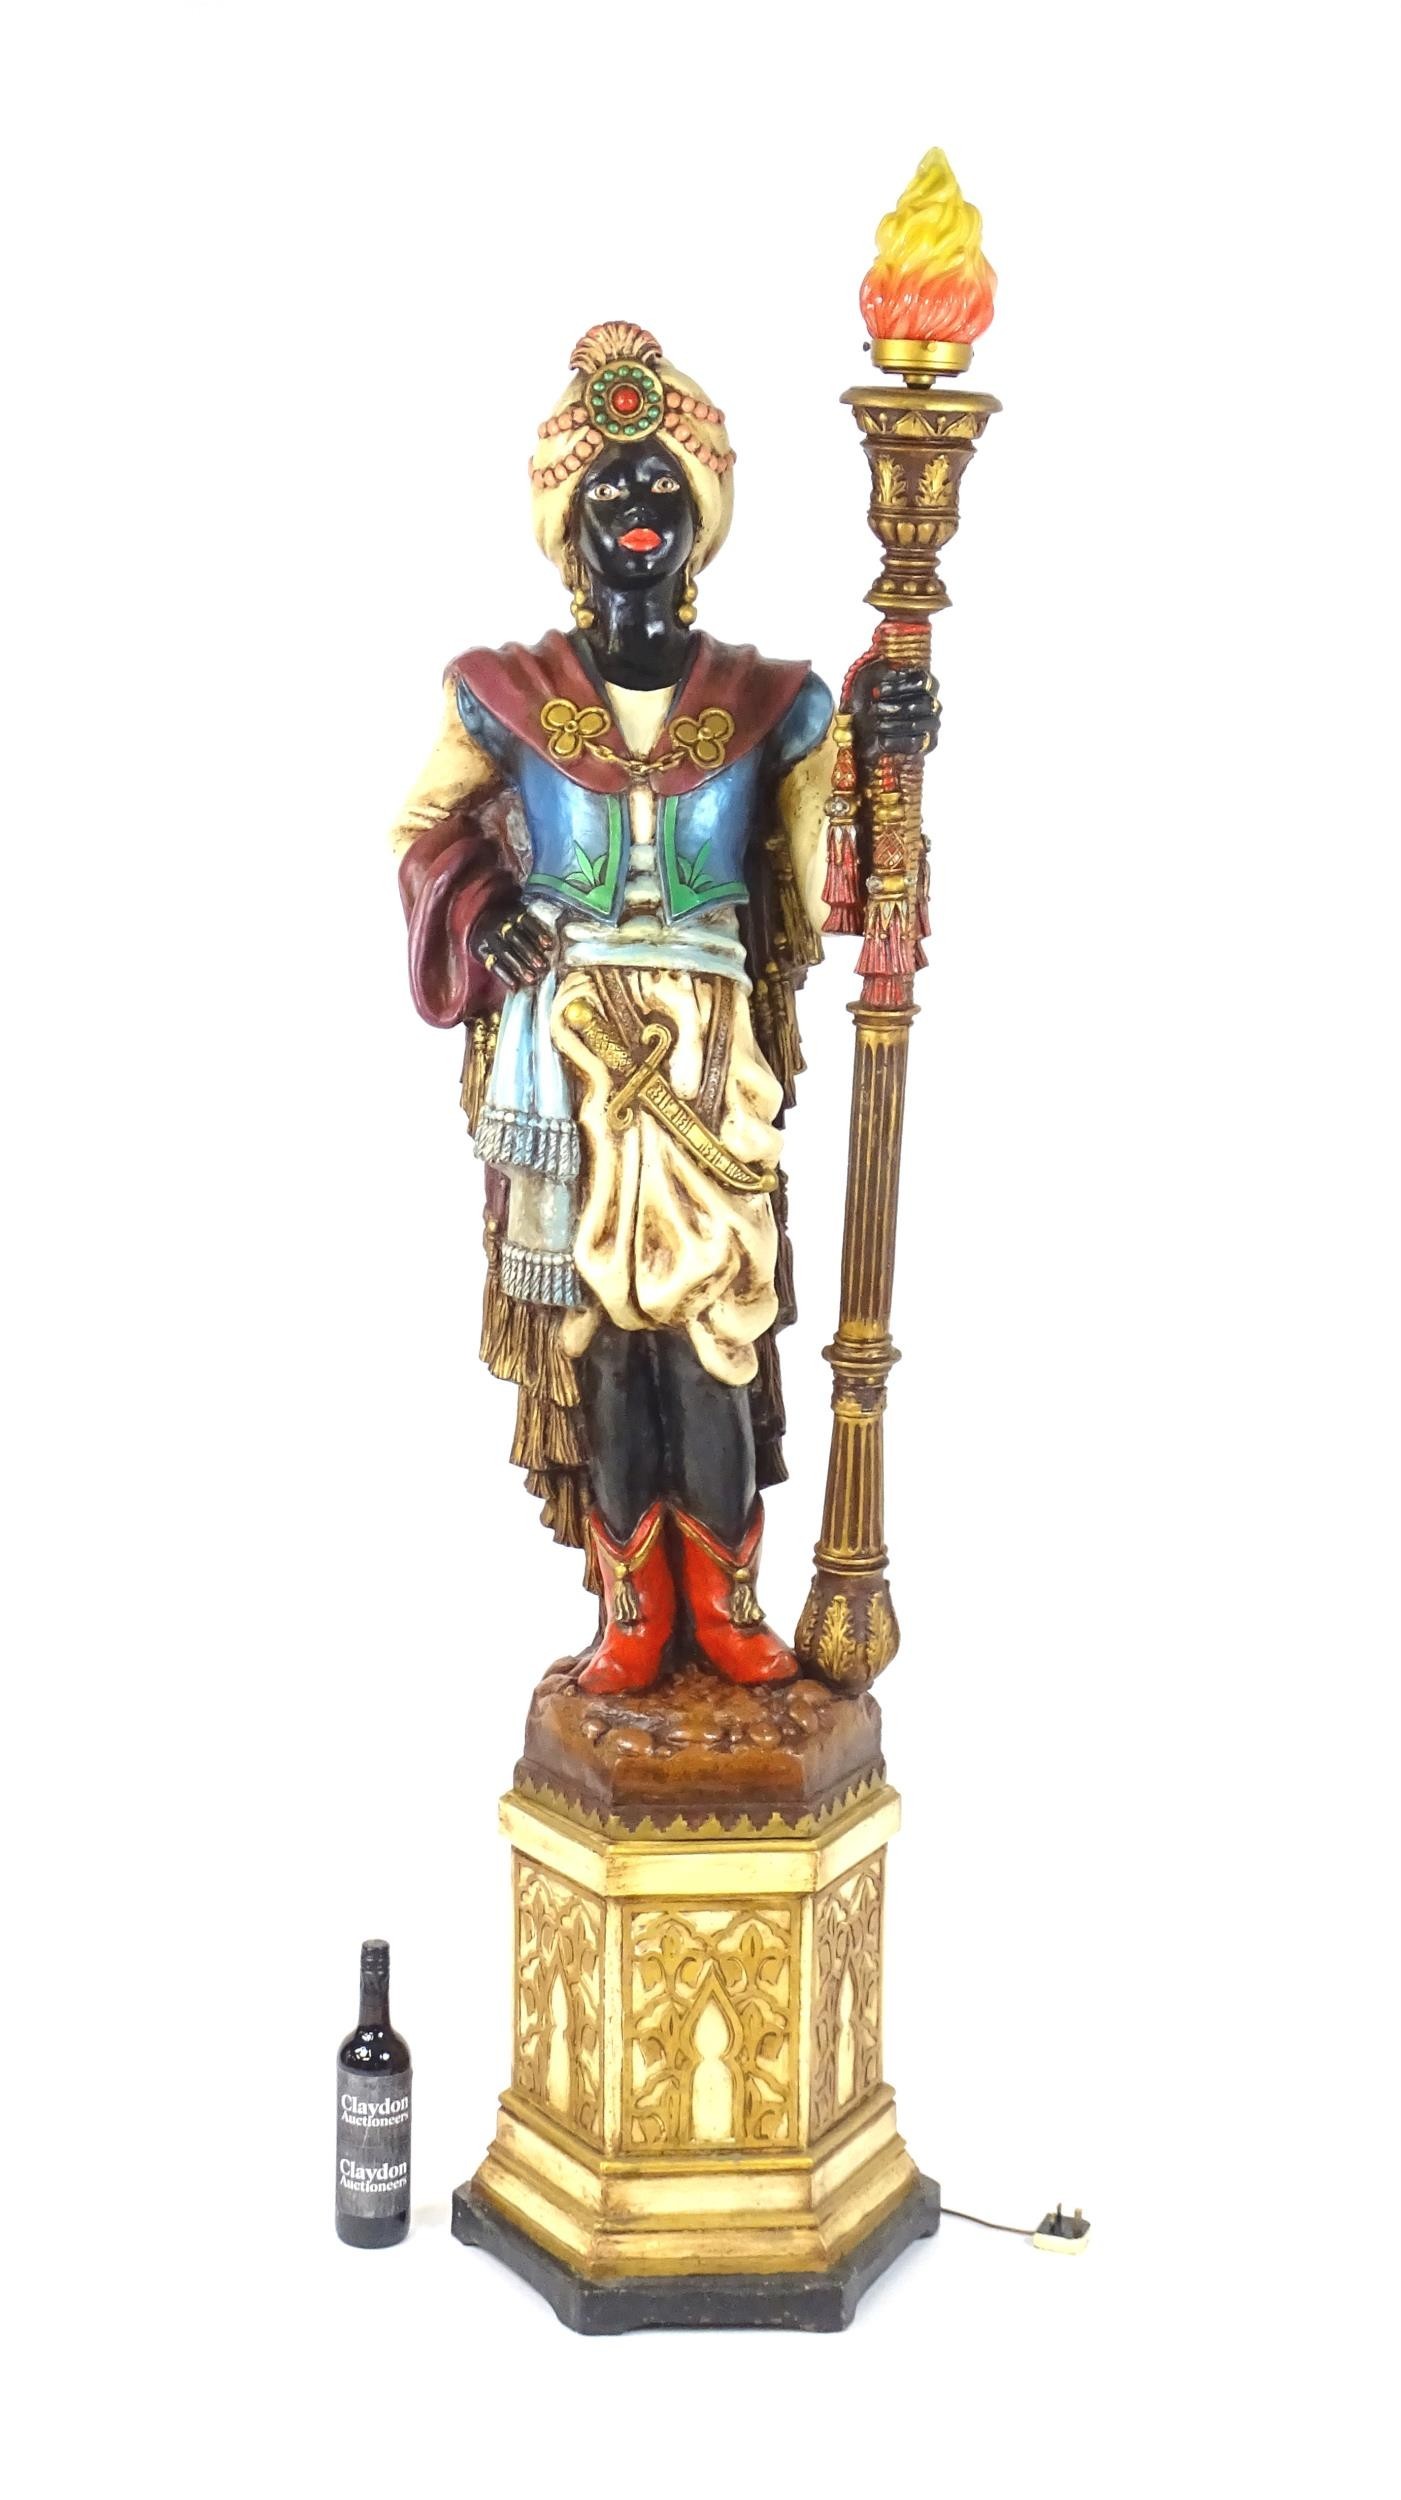 A mid 20thC blackamoor lamp, the lamp having a polychrome figural top grasping a torchiere, the